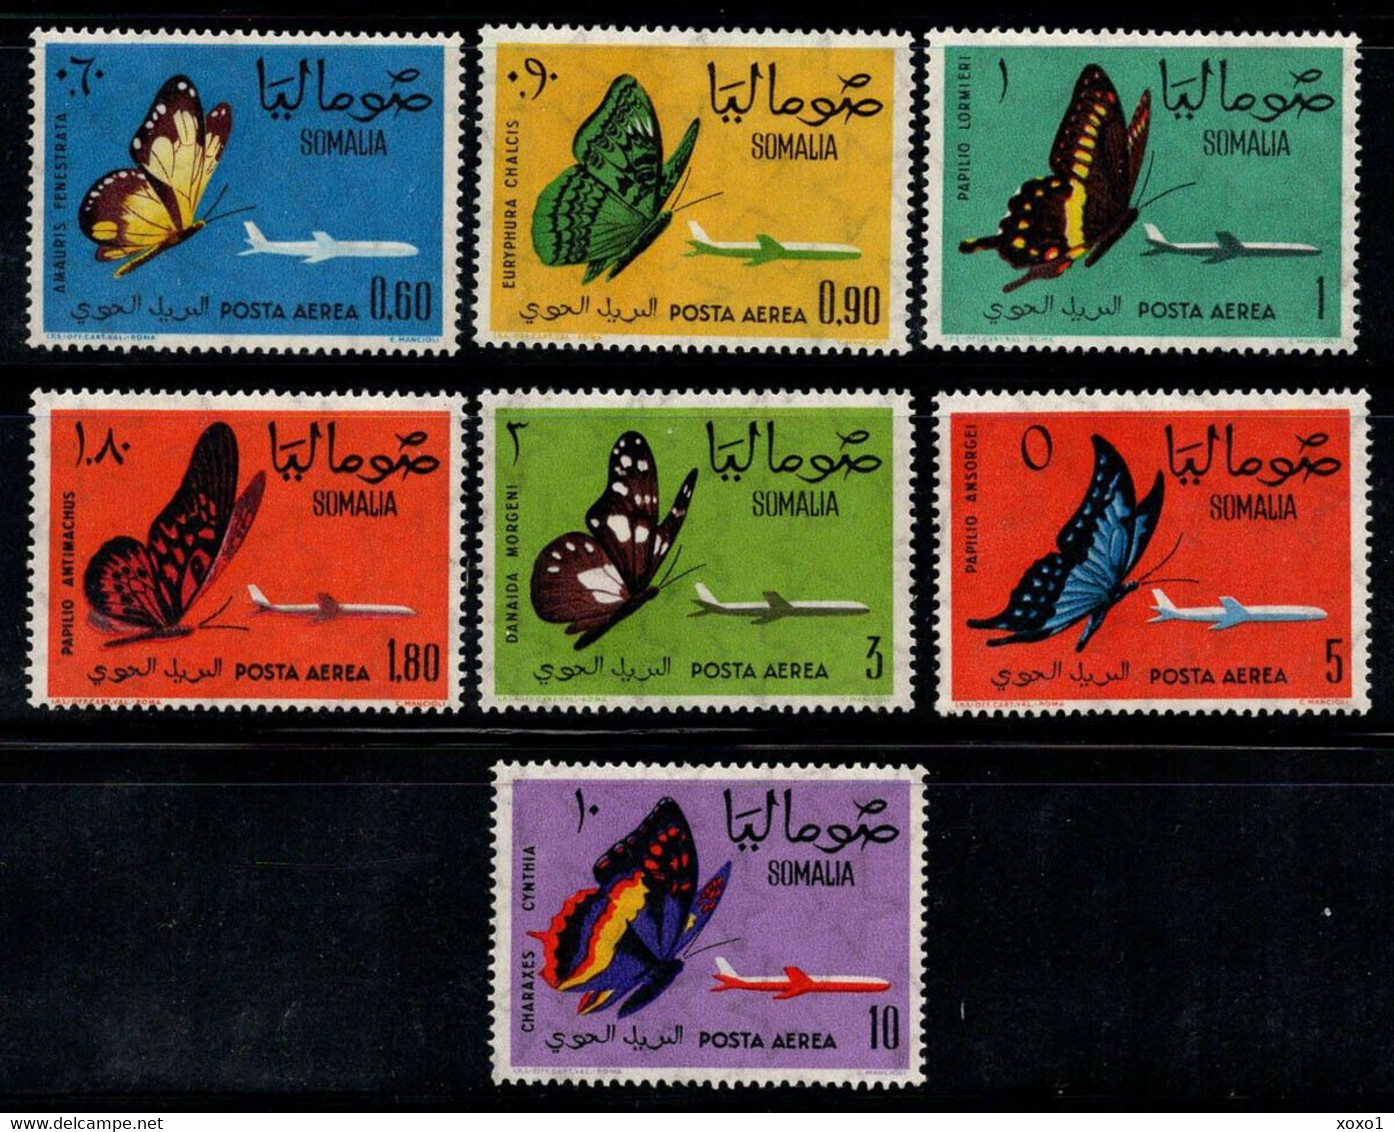 Somalia 1961 MiNr. 24 - 30  Insects Butterflies 7v MNH**  34,00 € - Somalie (1960-...)